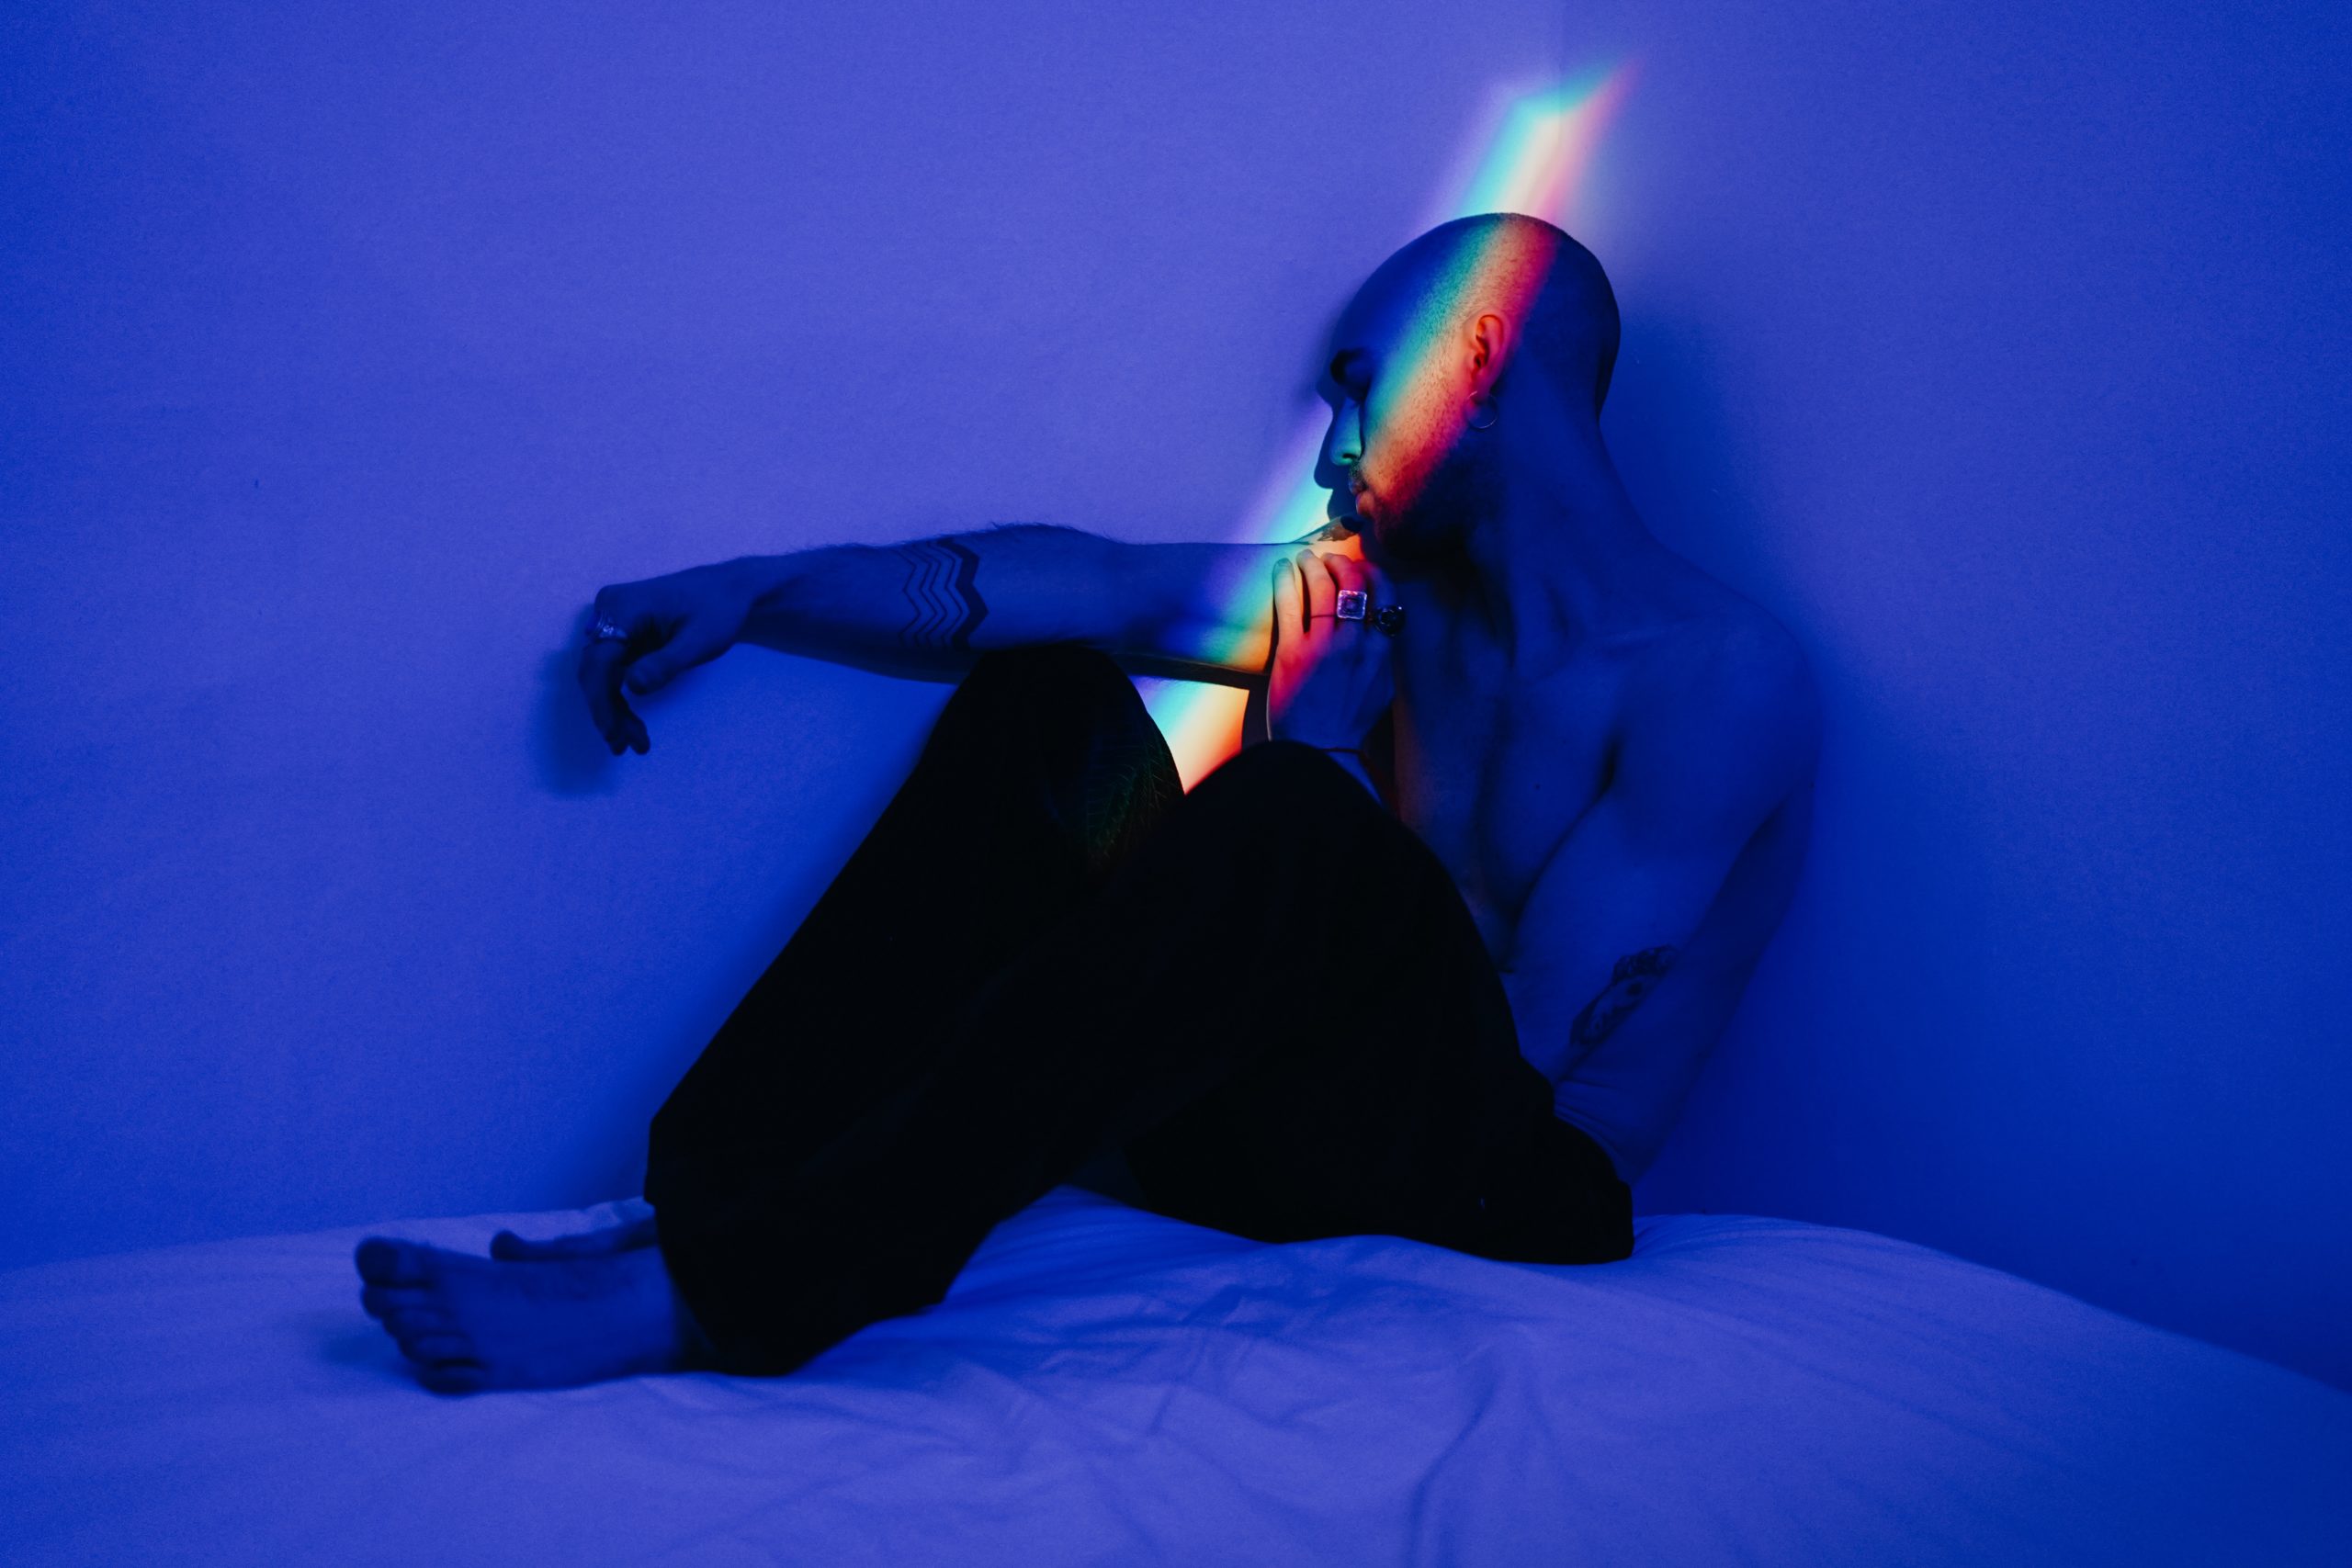 Man sitting shirtless on a bed with a rainbow light shining on him